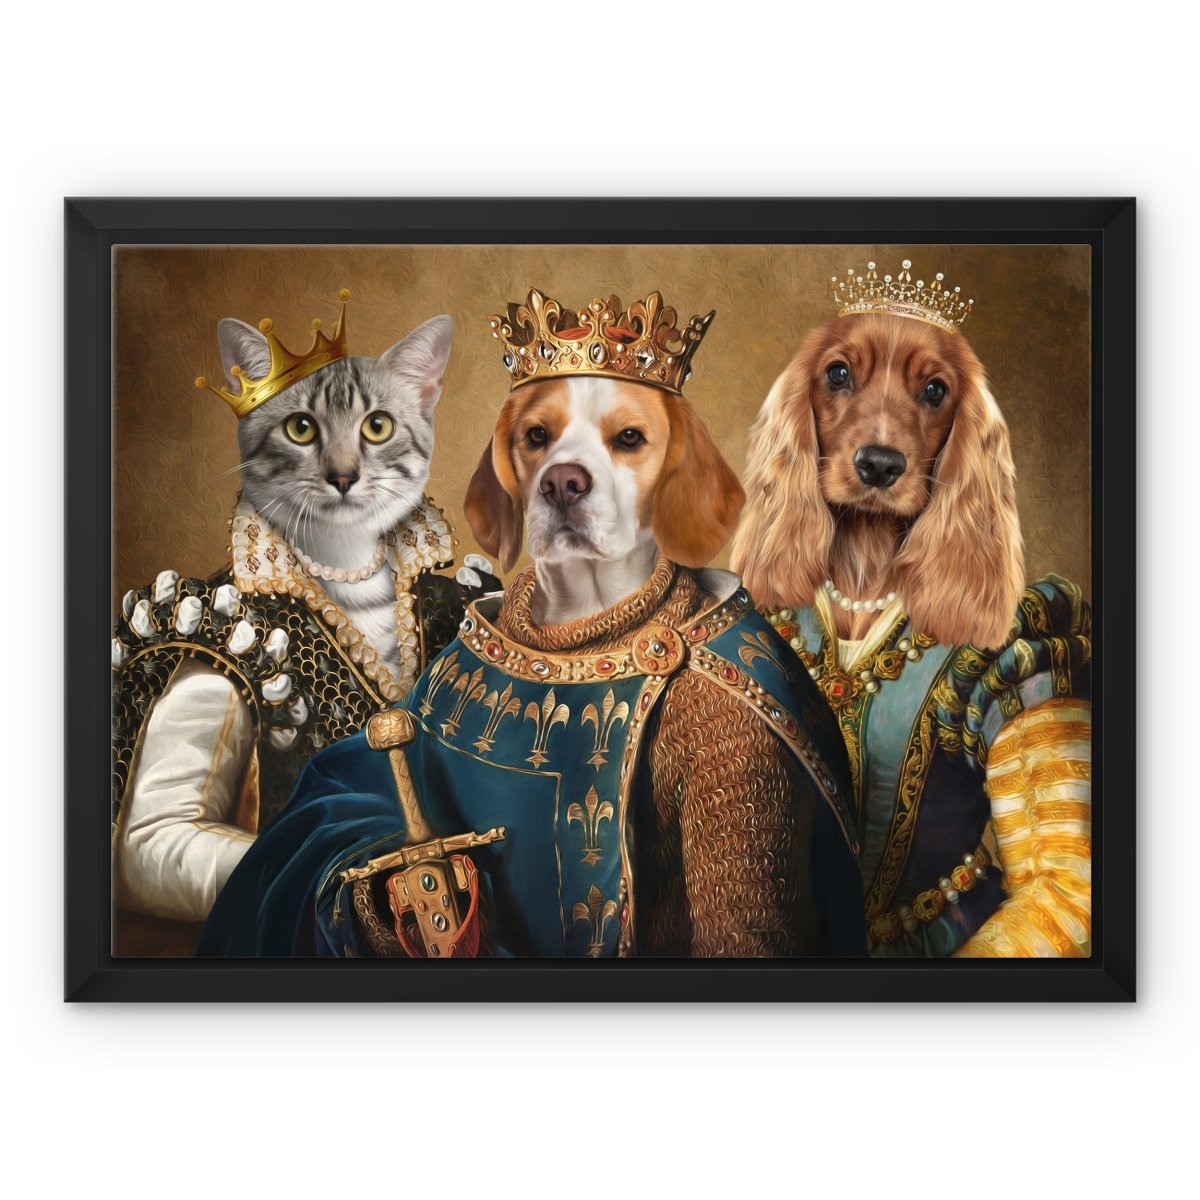 The Royals: Custom 3 Pet Canvas - Paw & Glory - #pet portraits# - #dog portraits# - #pet portraits uk#pawandglory, pet art canvas,canvas dog Canvas, custom pet canvas uk, personalized pet canvas, custom dog art canvas, pet in costume canvas